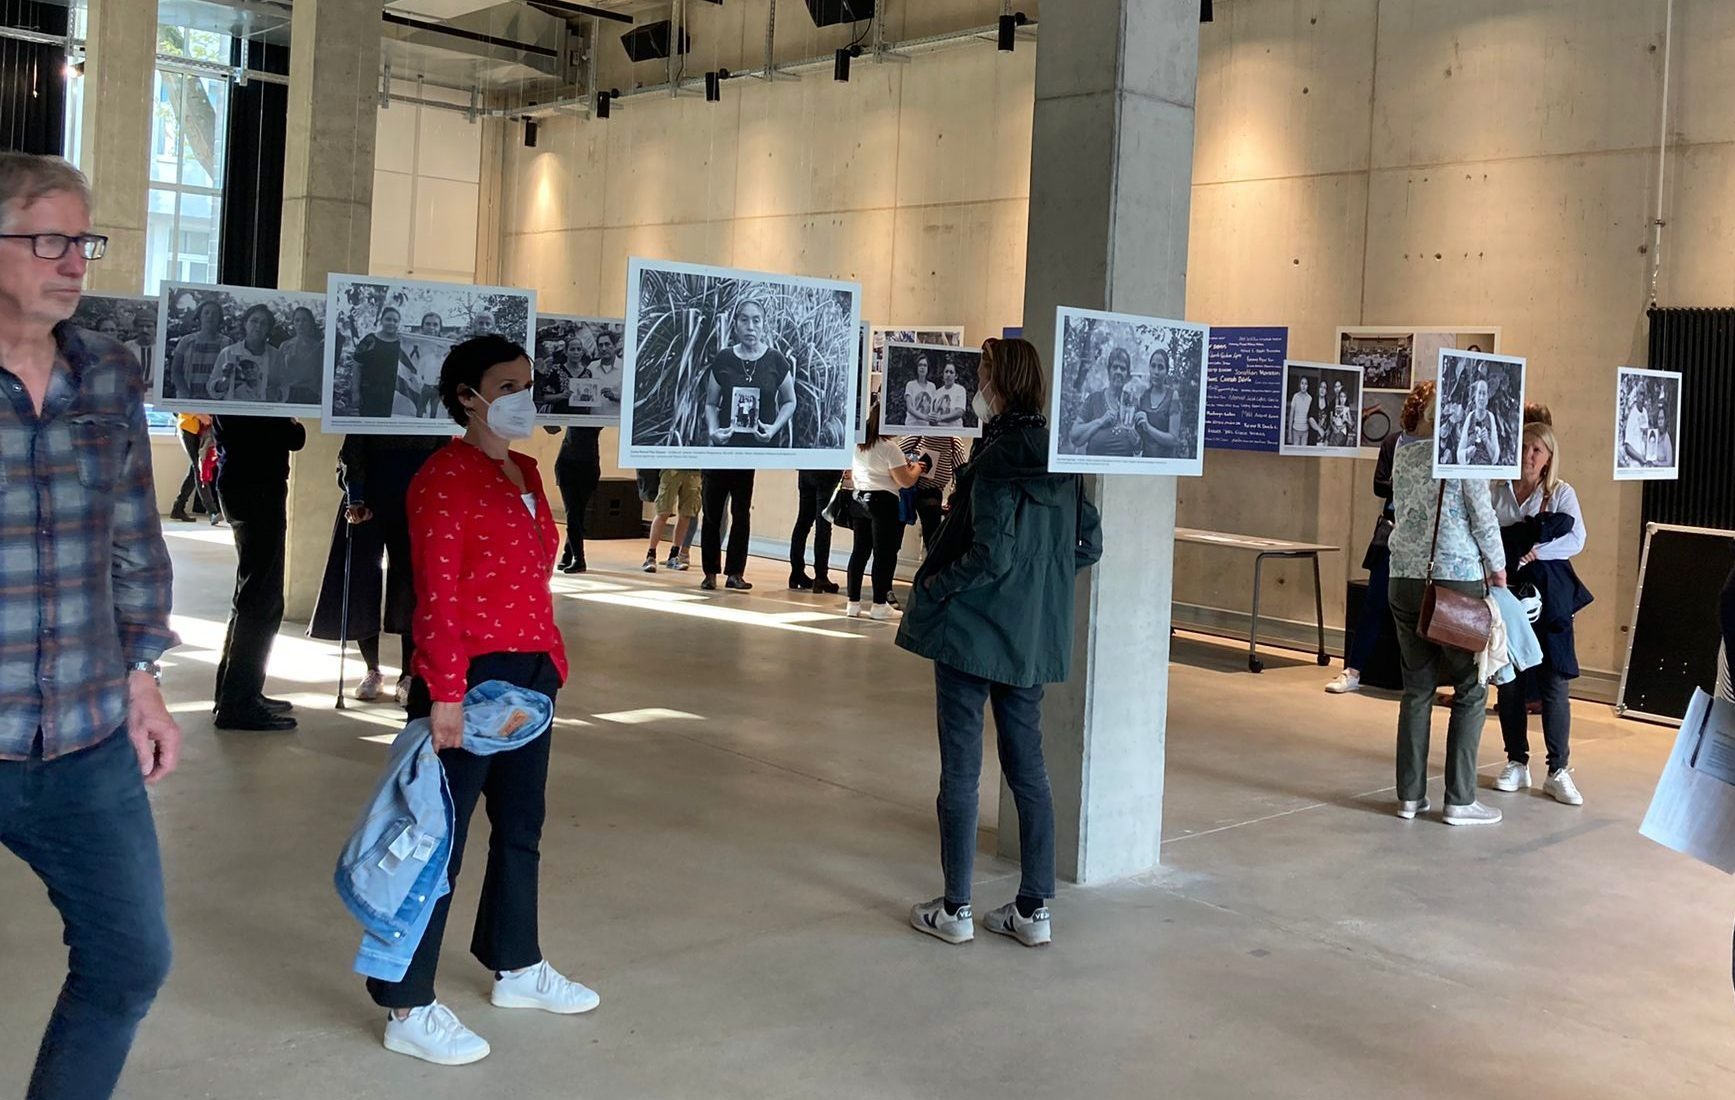 Mothers of April start a traveling exhibition around Europe demanding justice